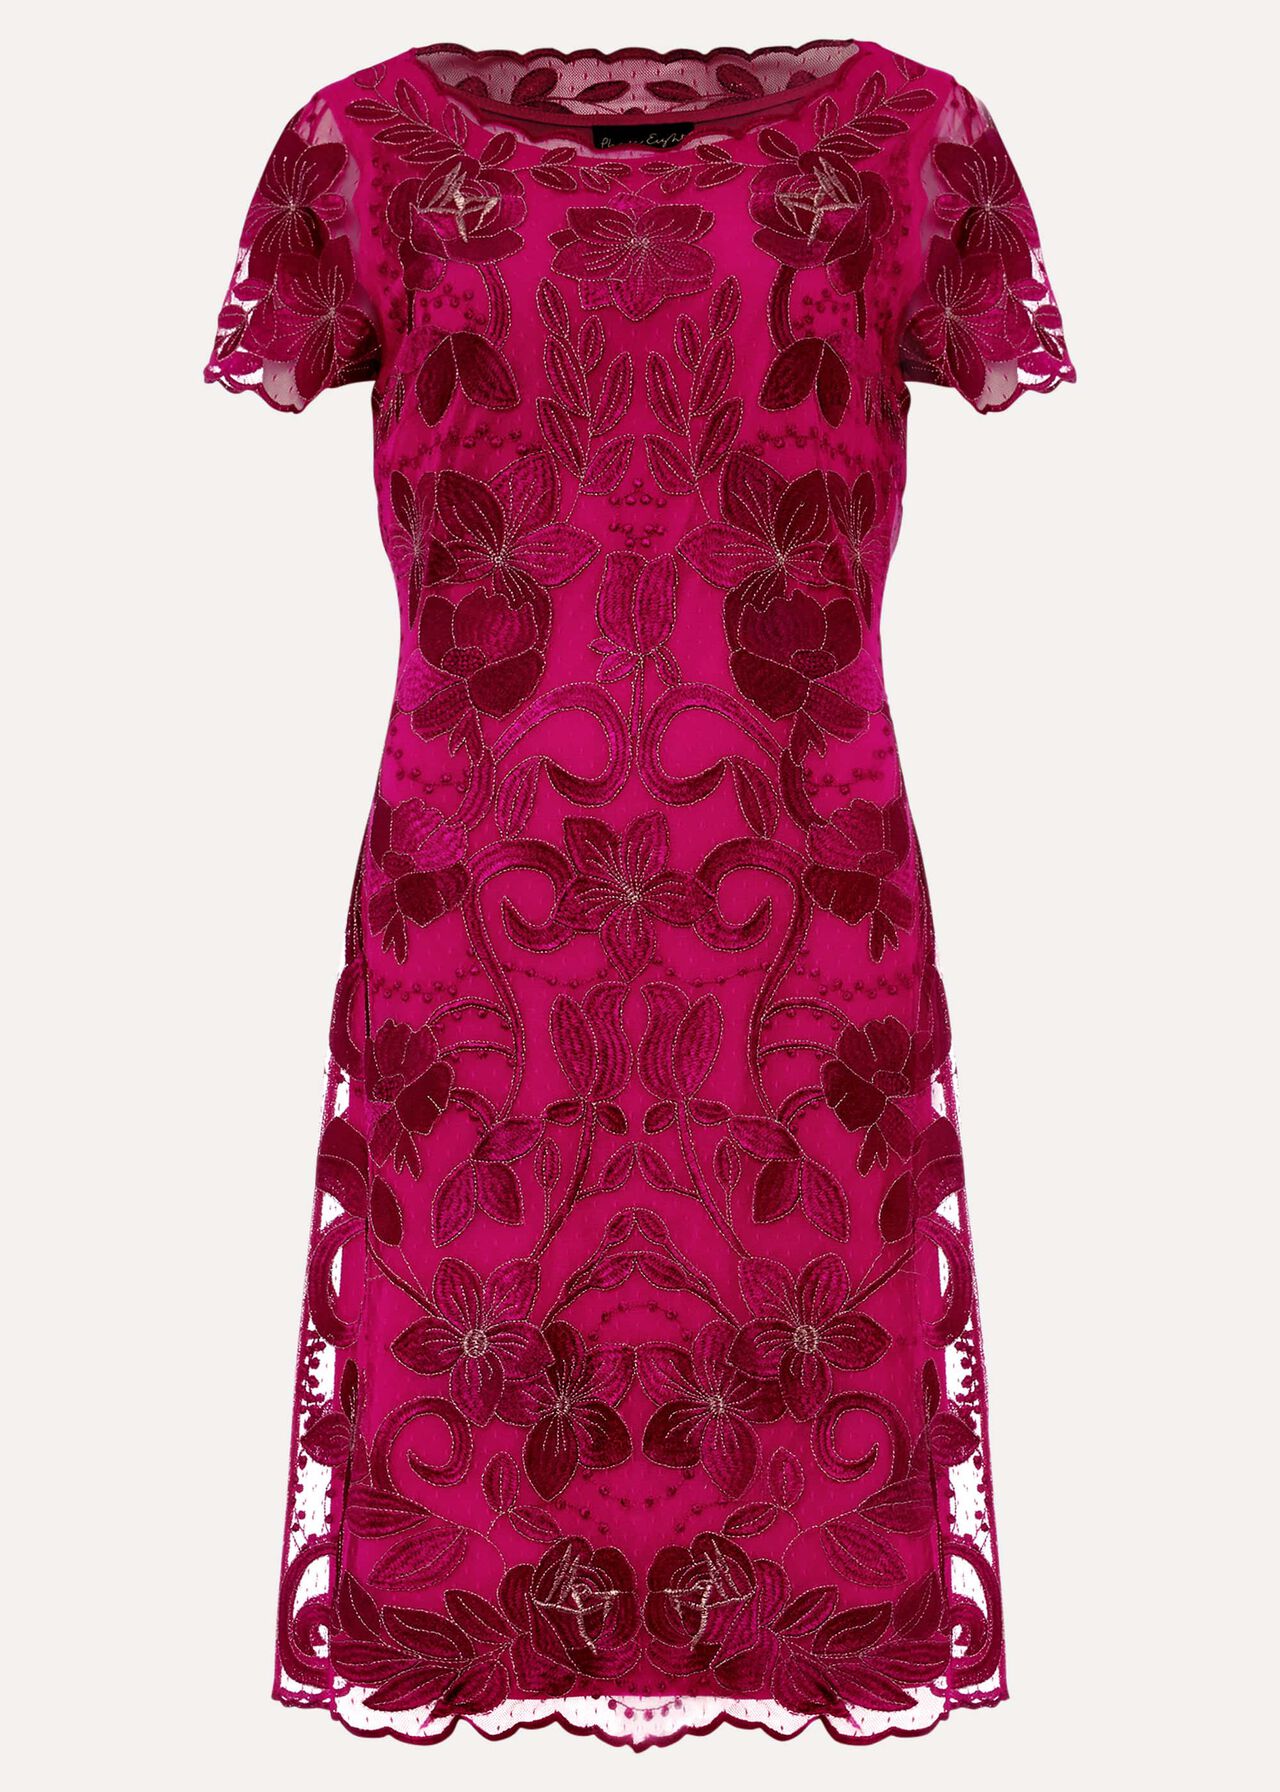 Nessa Embroidered Dress | Phase Eight